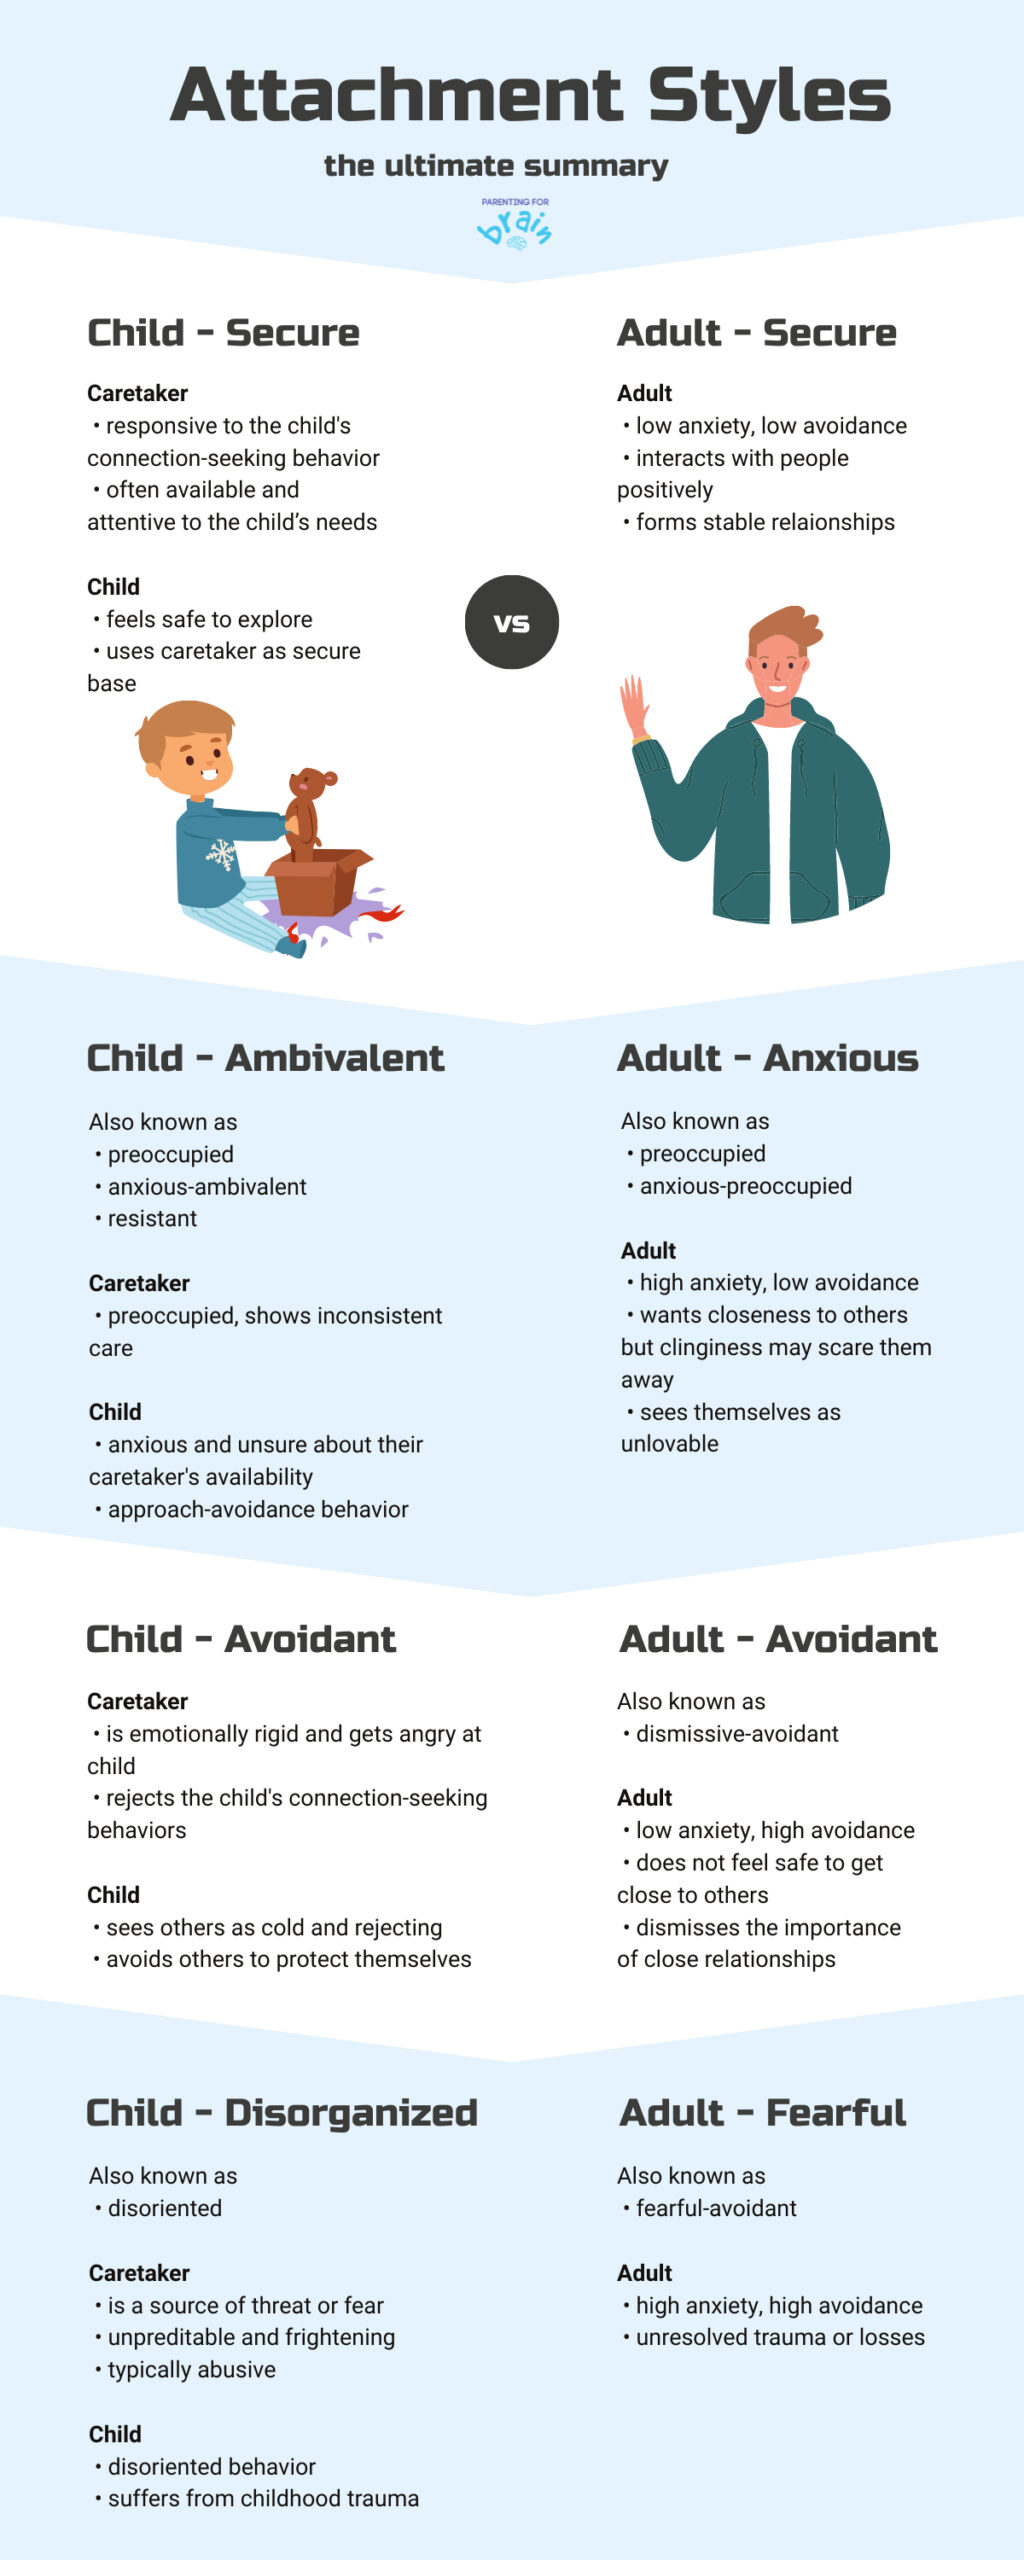 a summary of 4 different types of attachment styles in children and adults